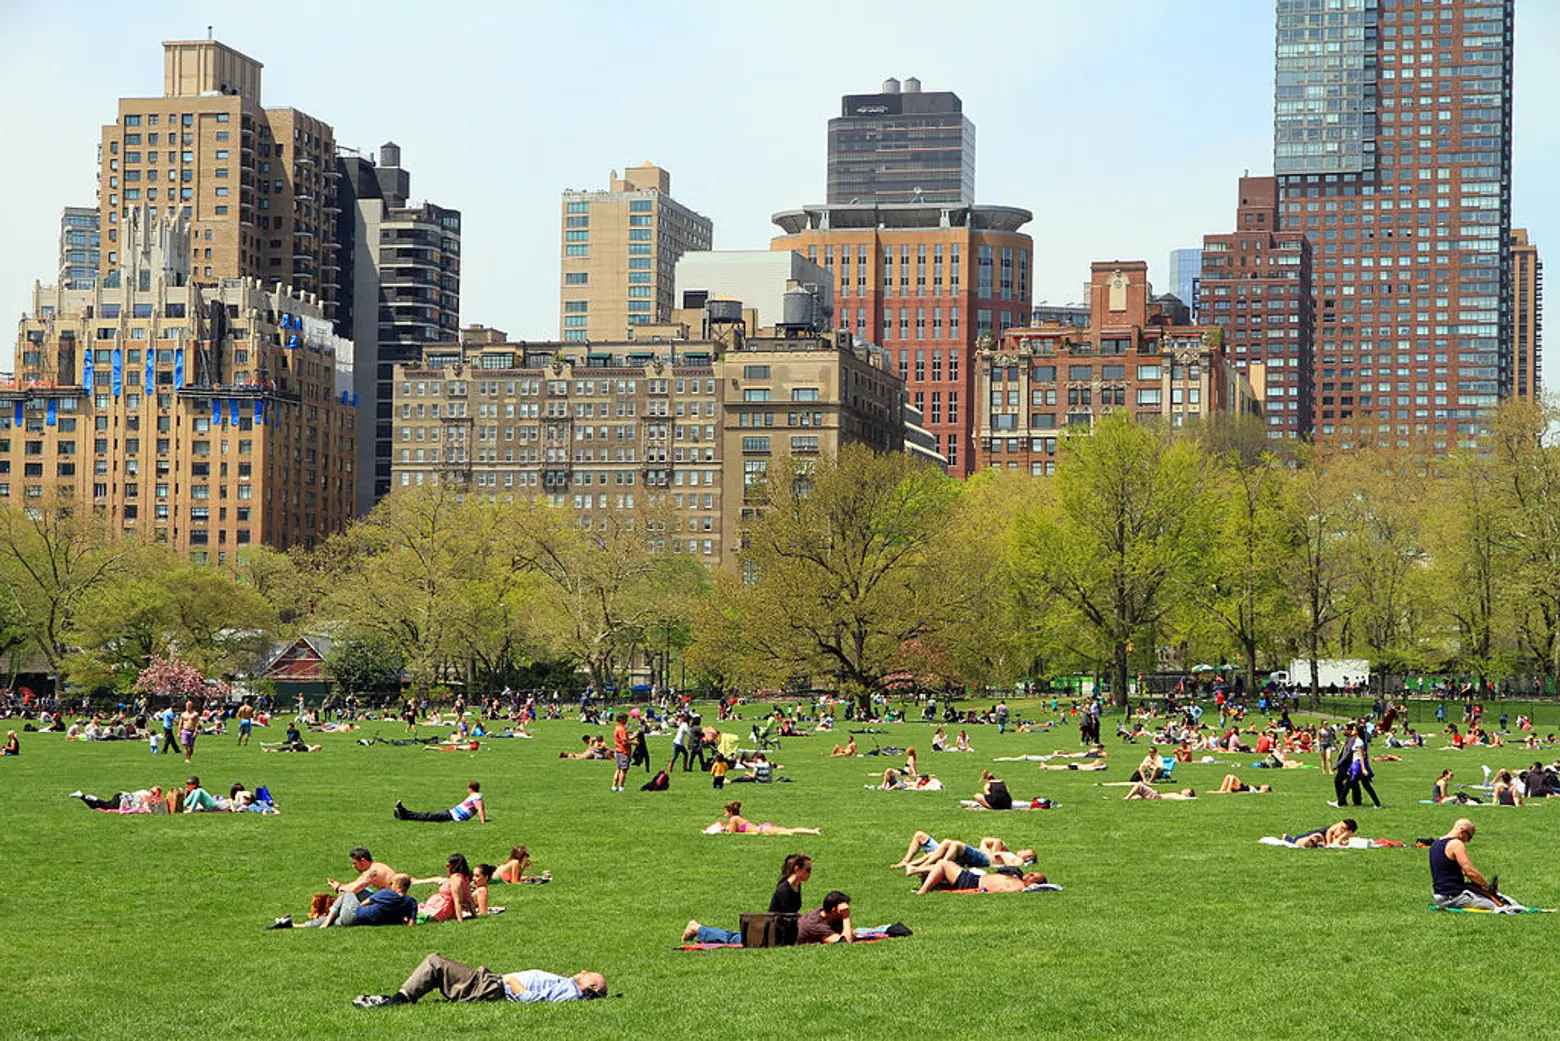 To live across from Central Park, you’ll pay 25% more than every bordering neighborhood